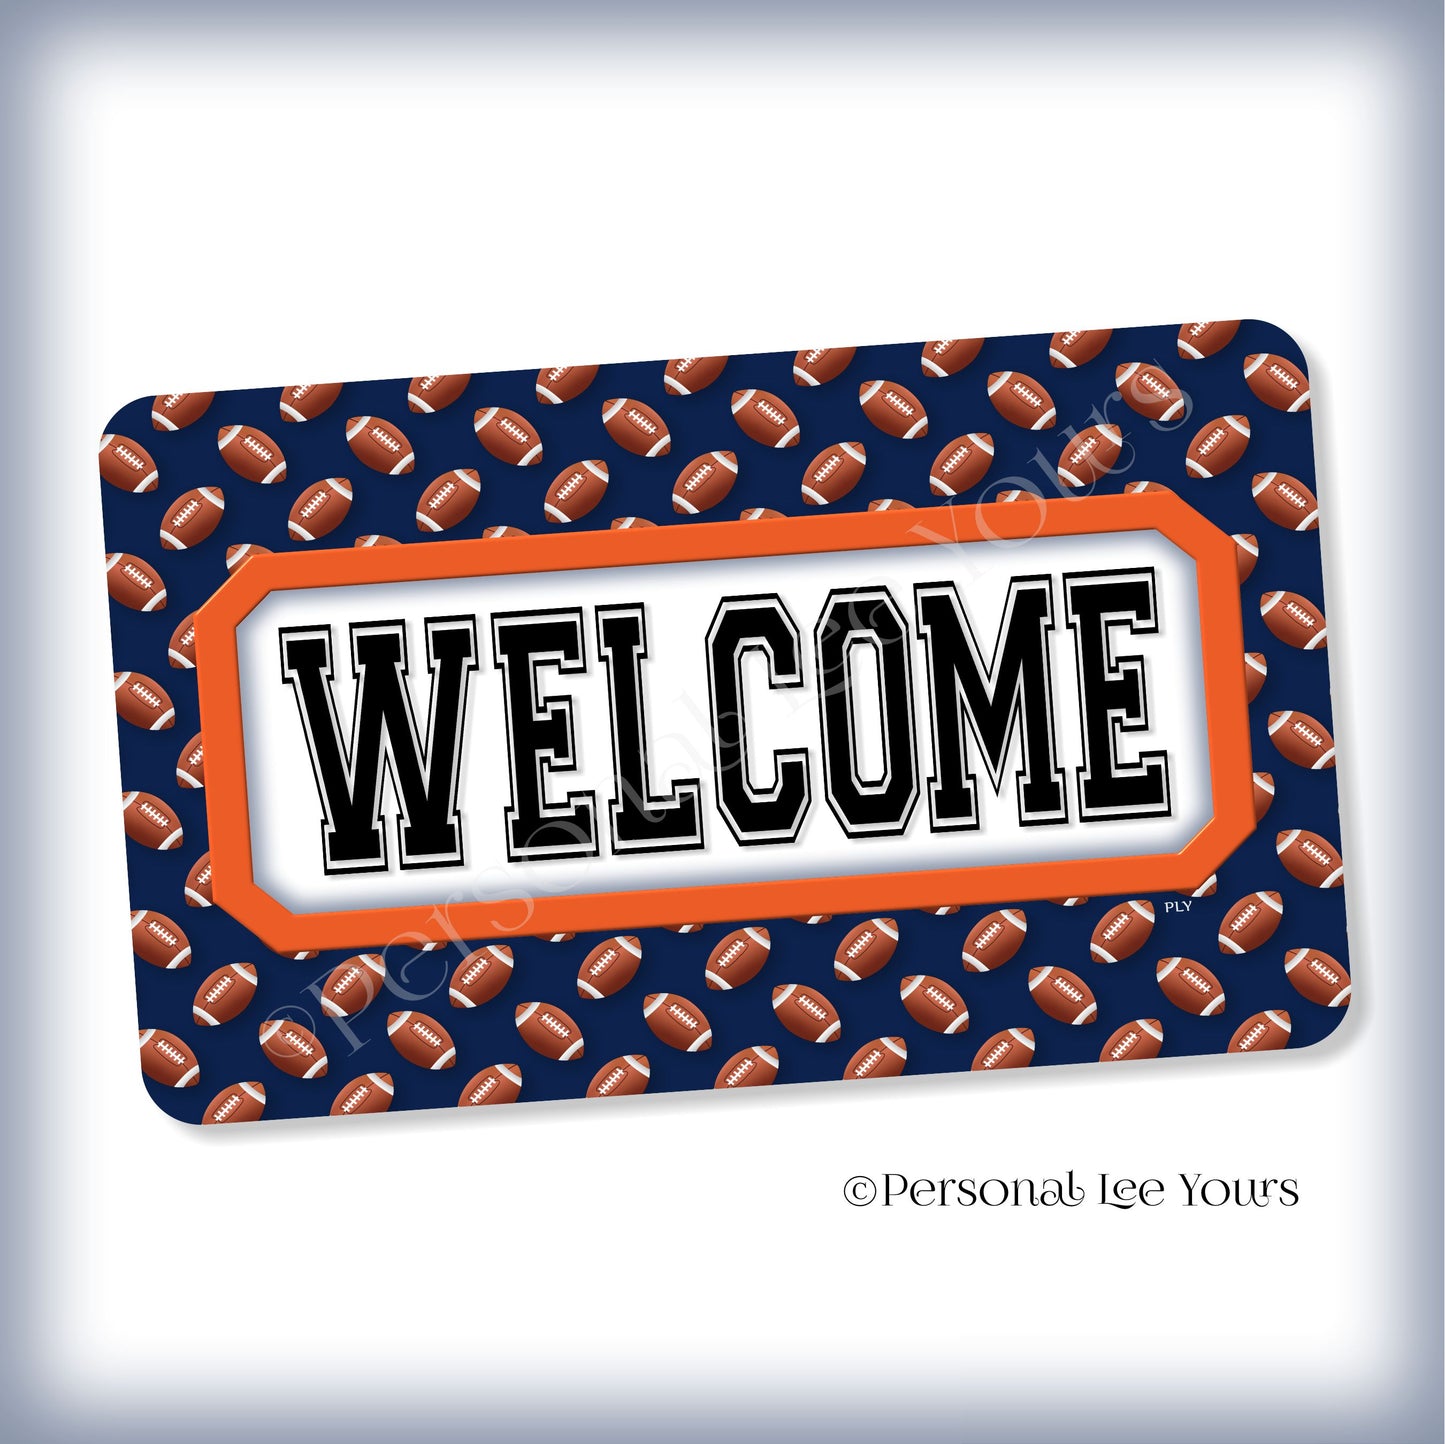 Simple Welcome Wreath Sign * Football, Chicago Navy and Orange * Horizontal * Lightweight Metal